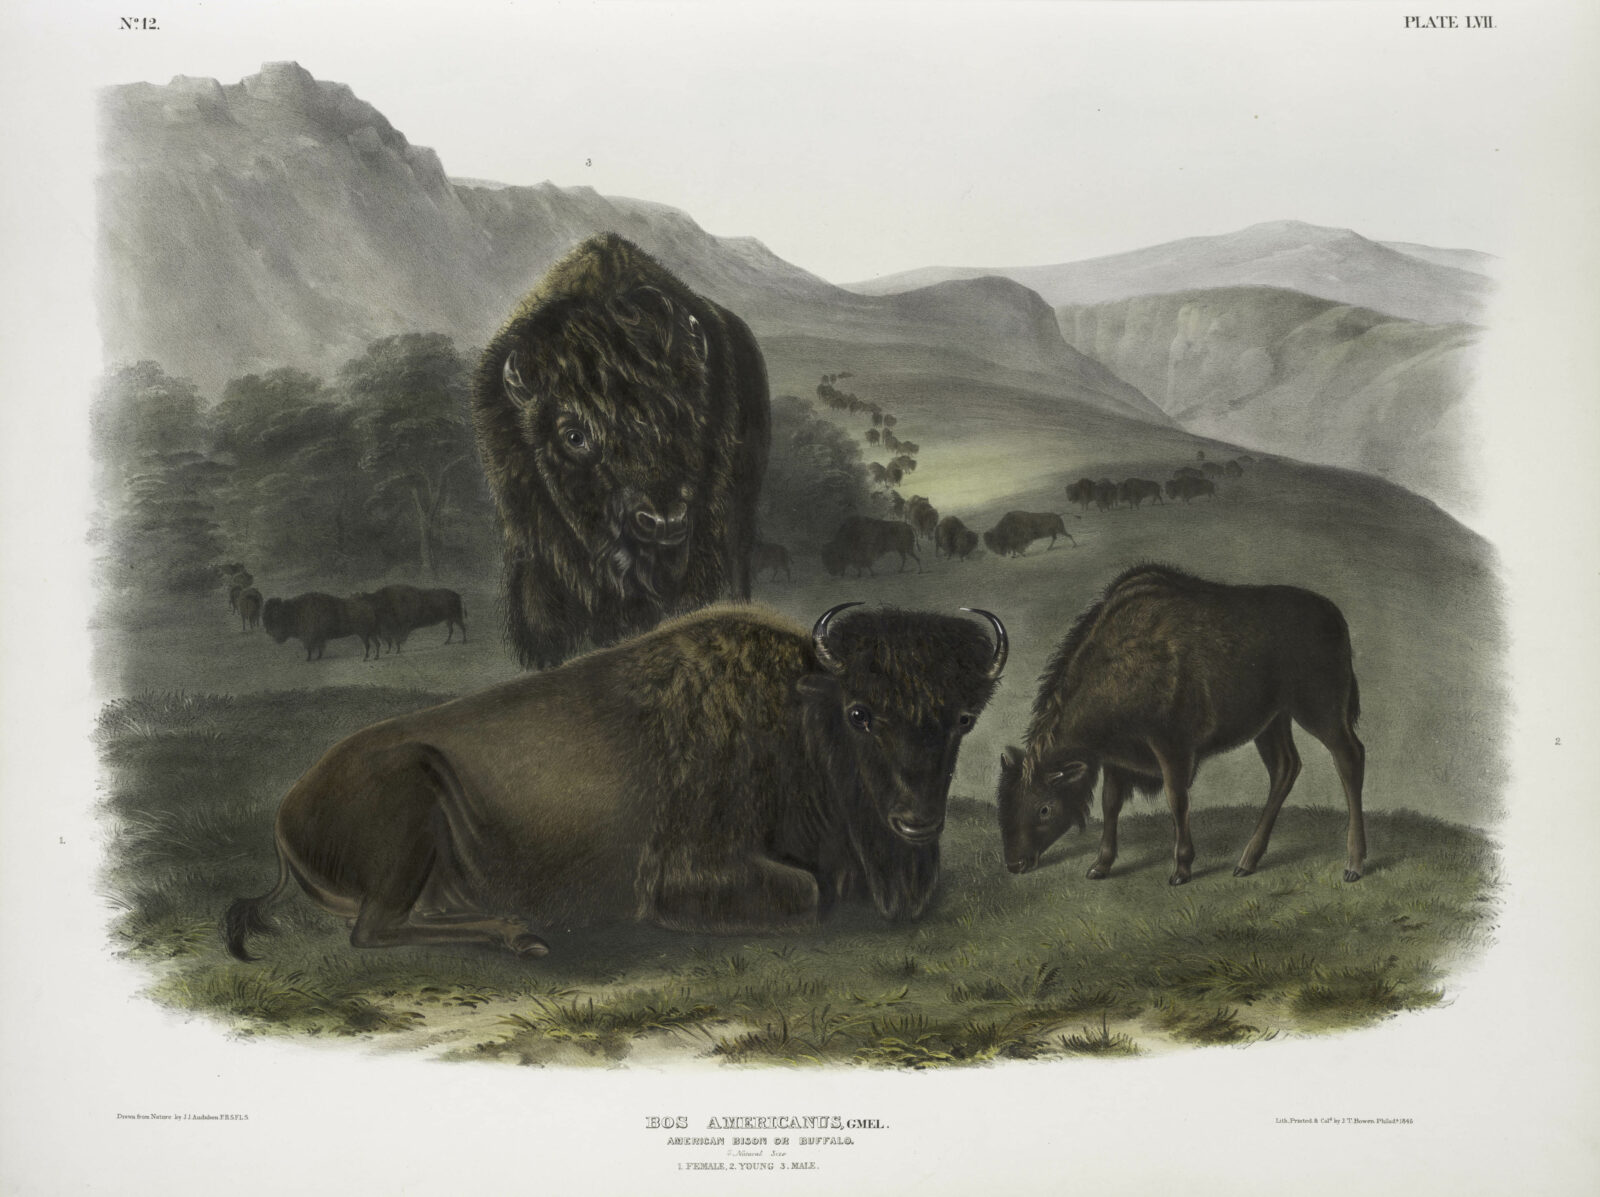 James Audubon, printed by John T. Bowen, "American Bison", from "The Quadrupeds of North American", 1845-48. Hand-colored lithograph. This exhibition has been loaned through the Bank of America Art in our Communities® program.